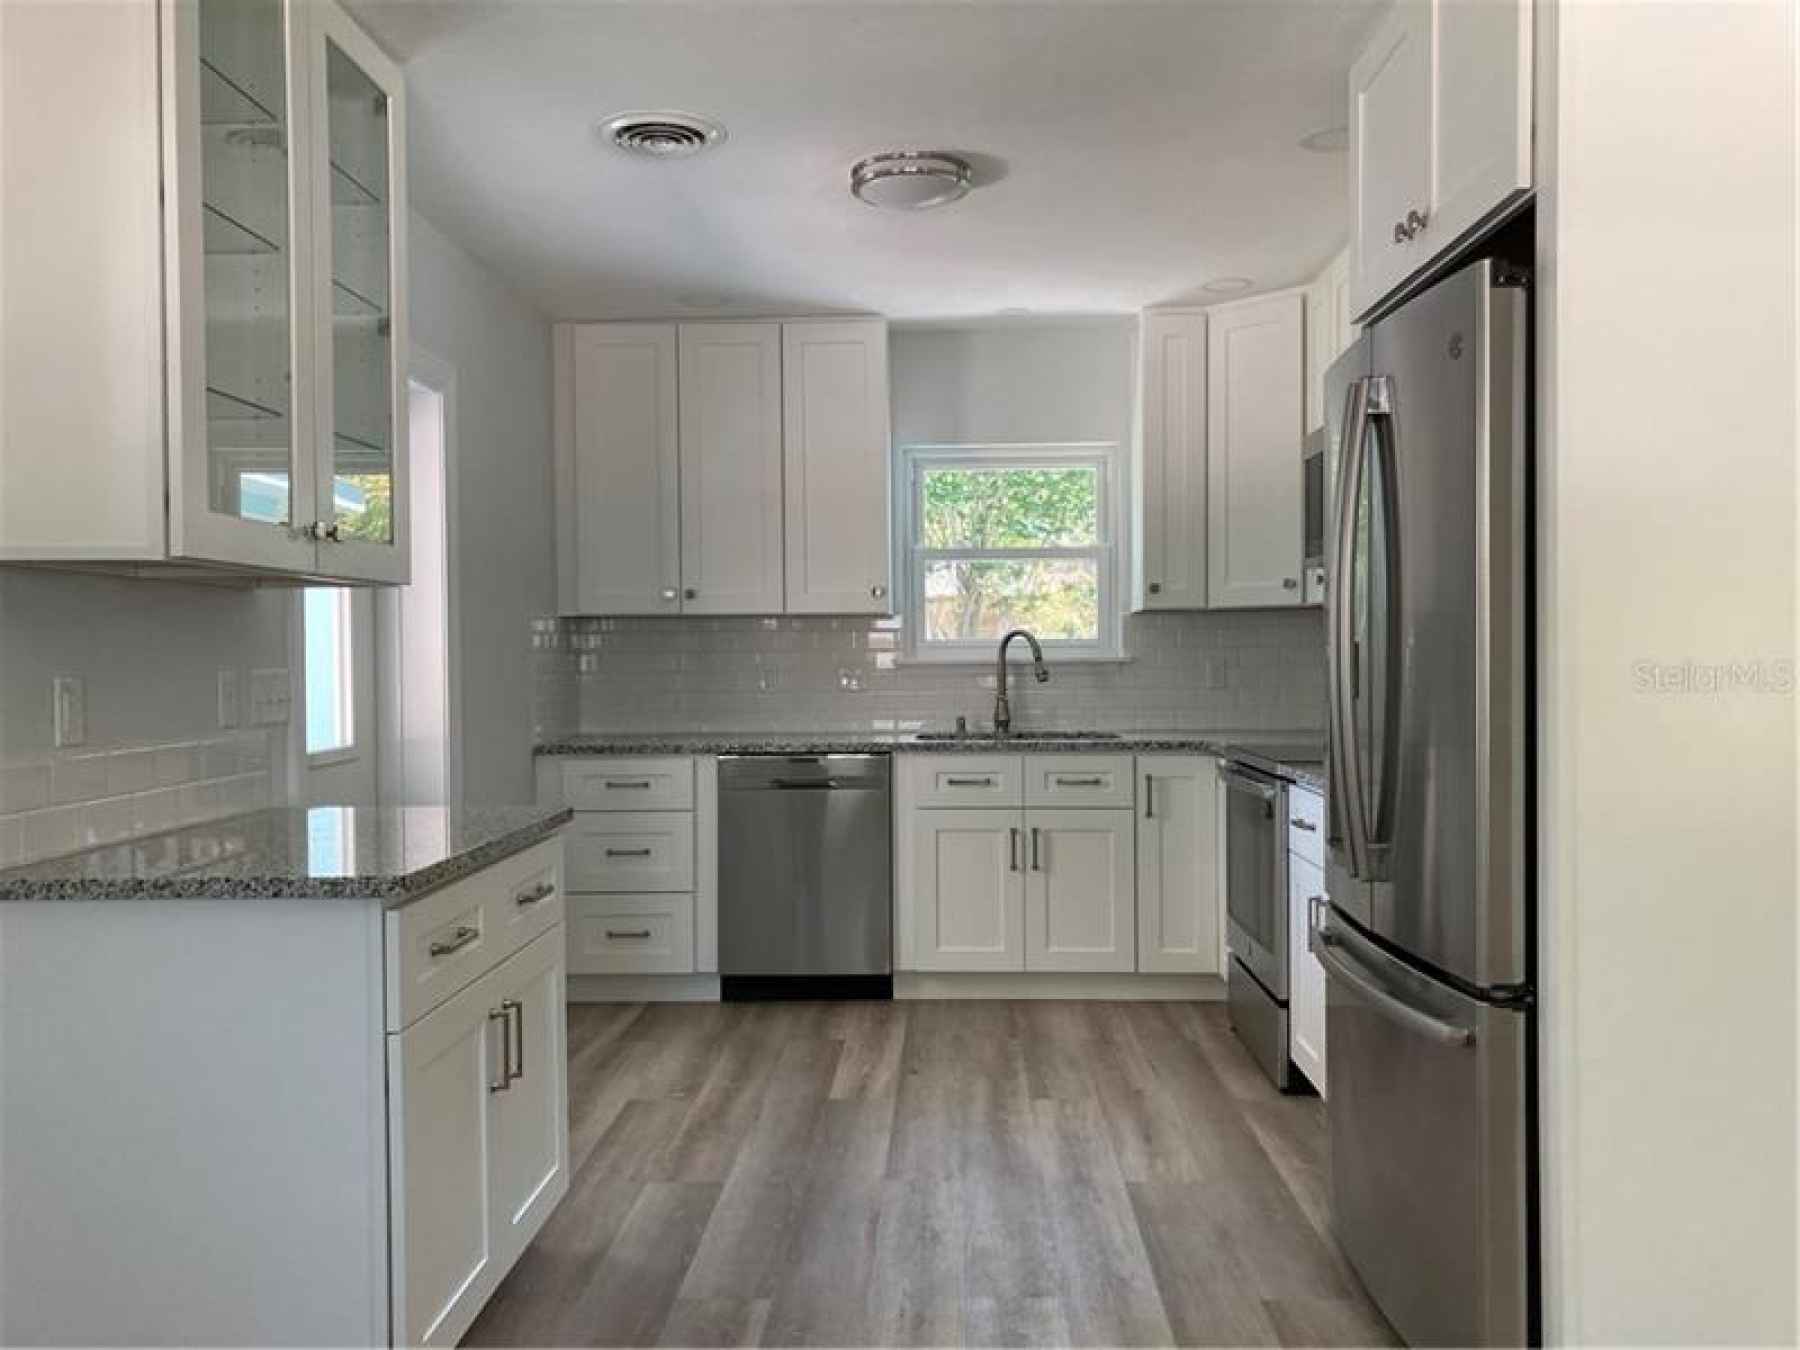 Beautiful remodeled kitchen with all new appliances